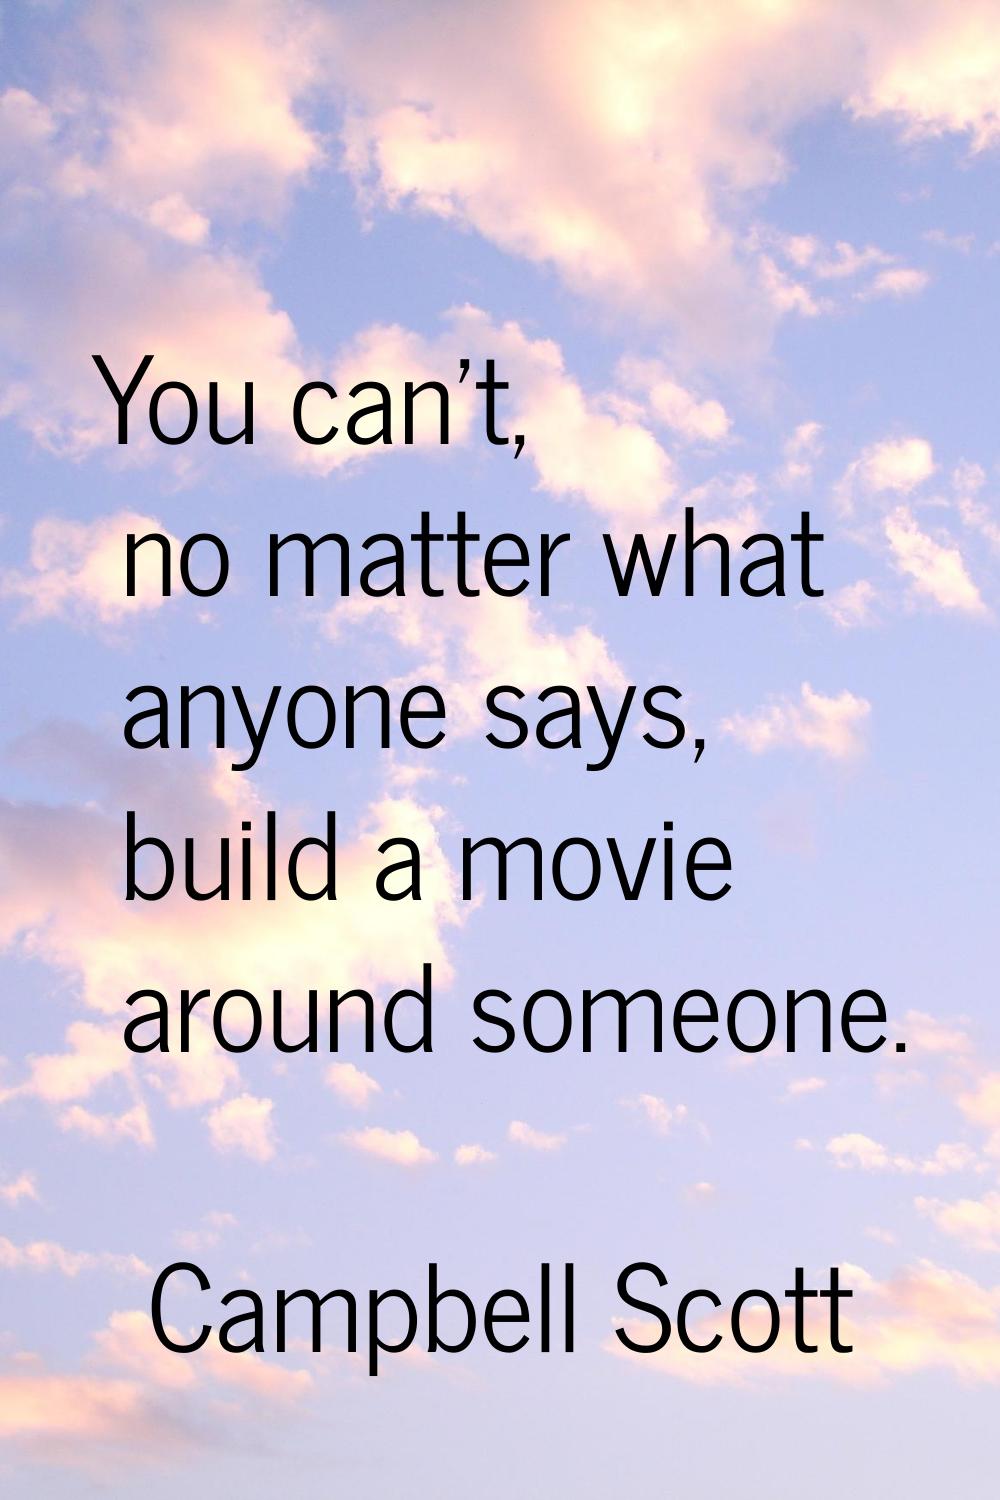 You can't, no matter what anyone says, build a movie around someone.